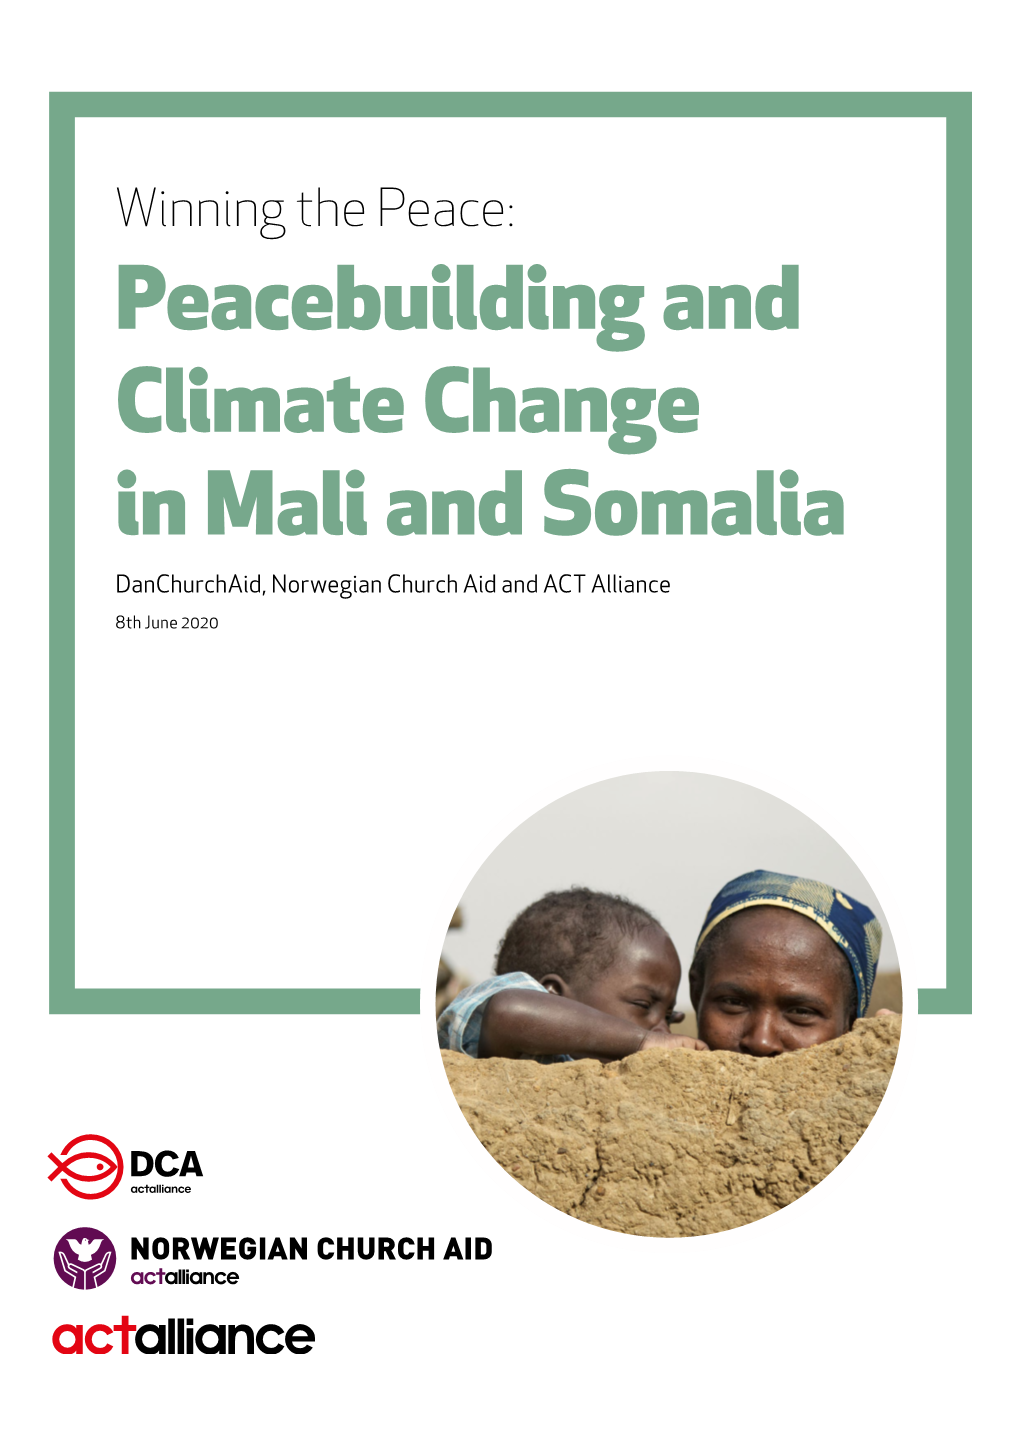 Peacebuilding and Climate Change in Mali and Somalia